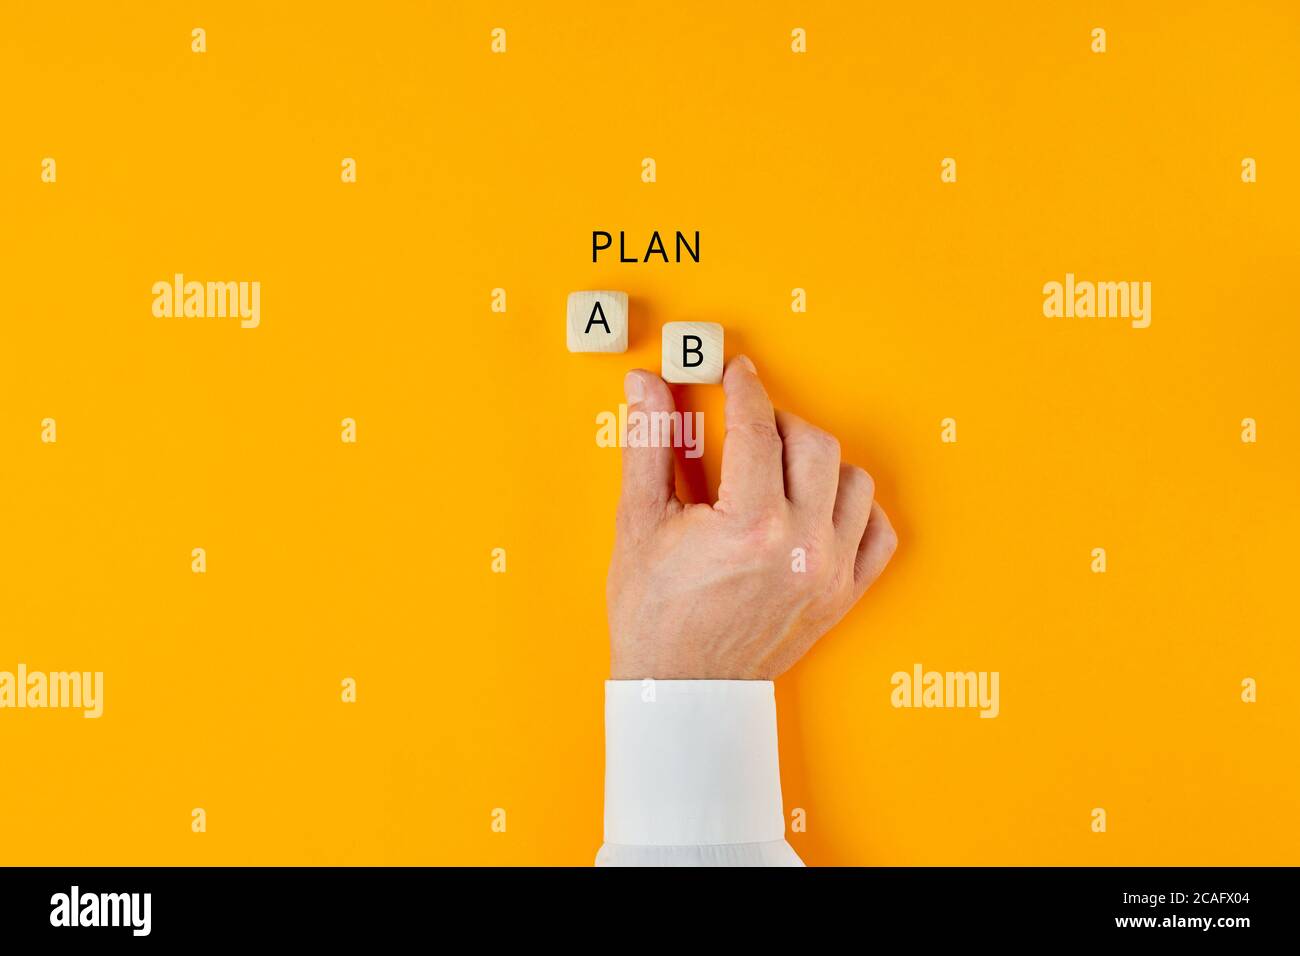 Hand of a businessman choosing business plan b out of two options on yellow background. Business strategy and decisions concept. Stock Photo